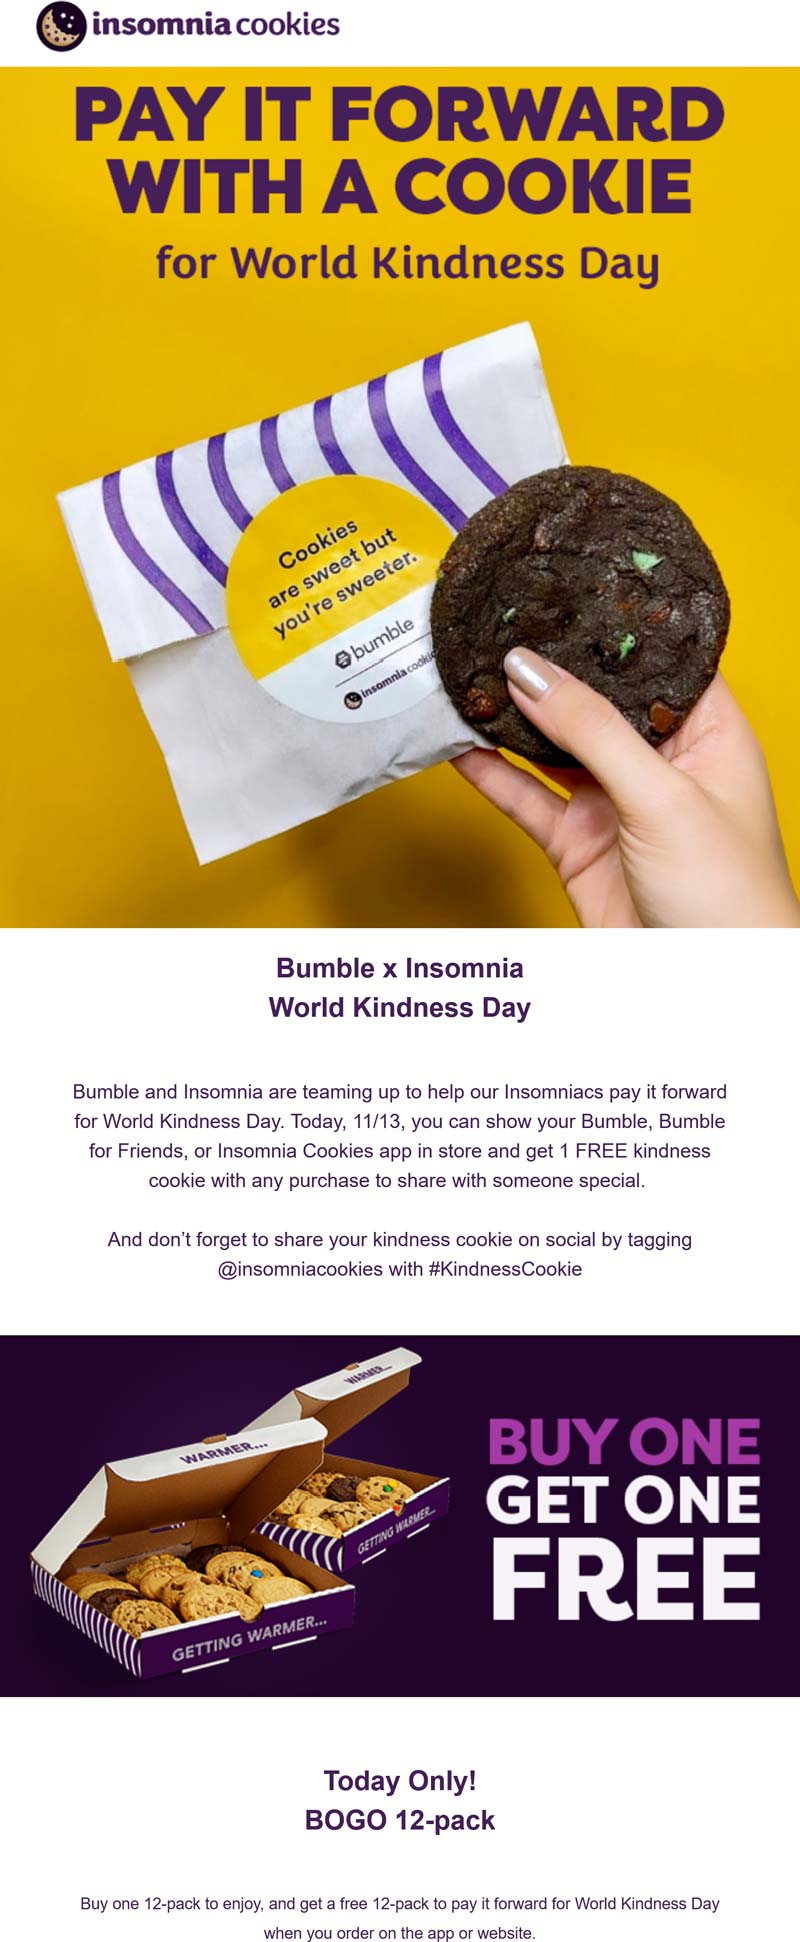 Insomnia Cookies restaurants Coupon  Free cookie with any purchase today & second 12-pack free at Insomnia Cookies #insomniacookies 